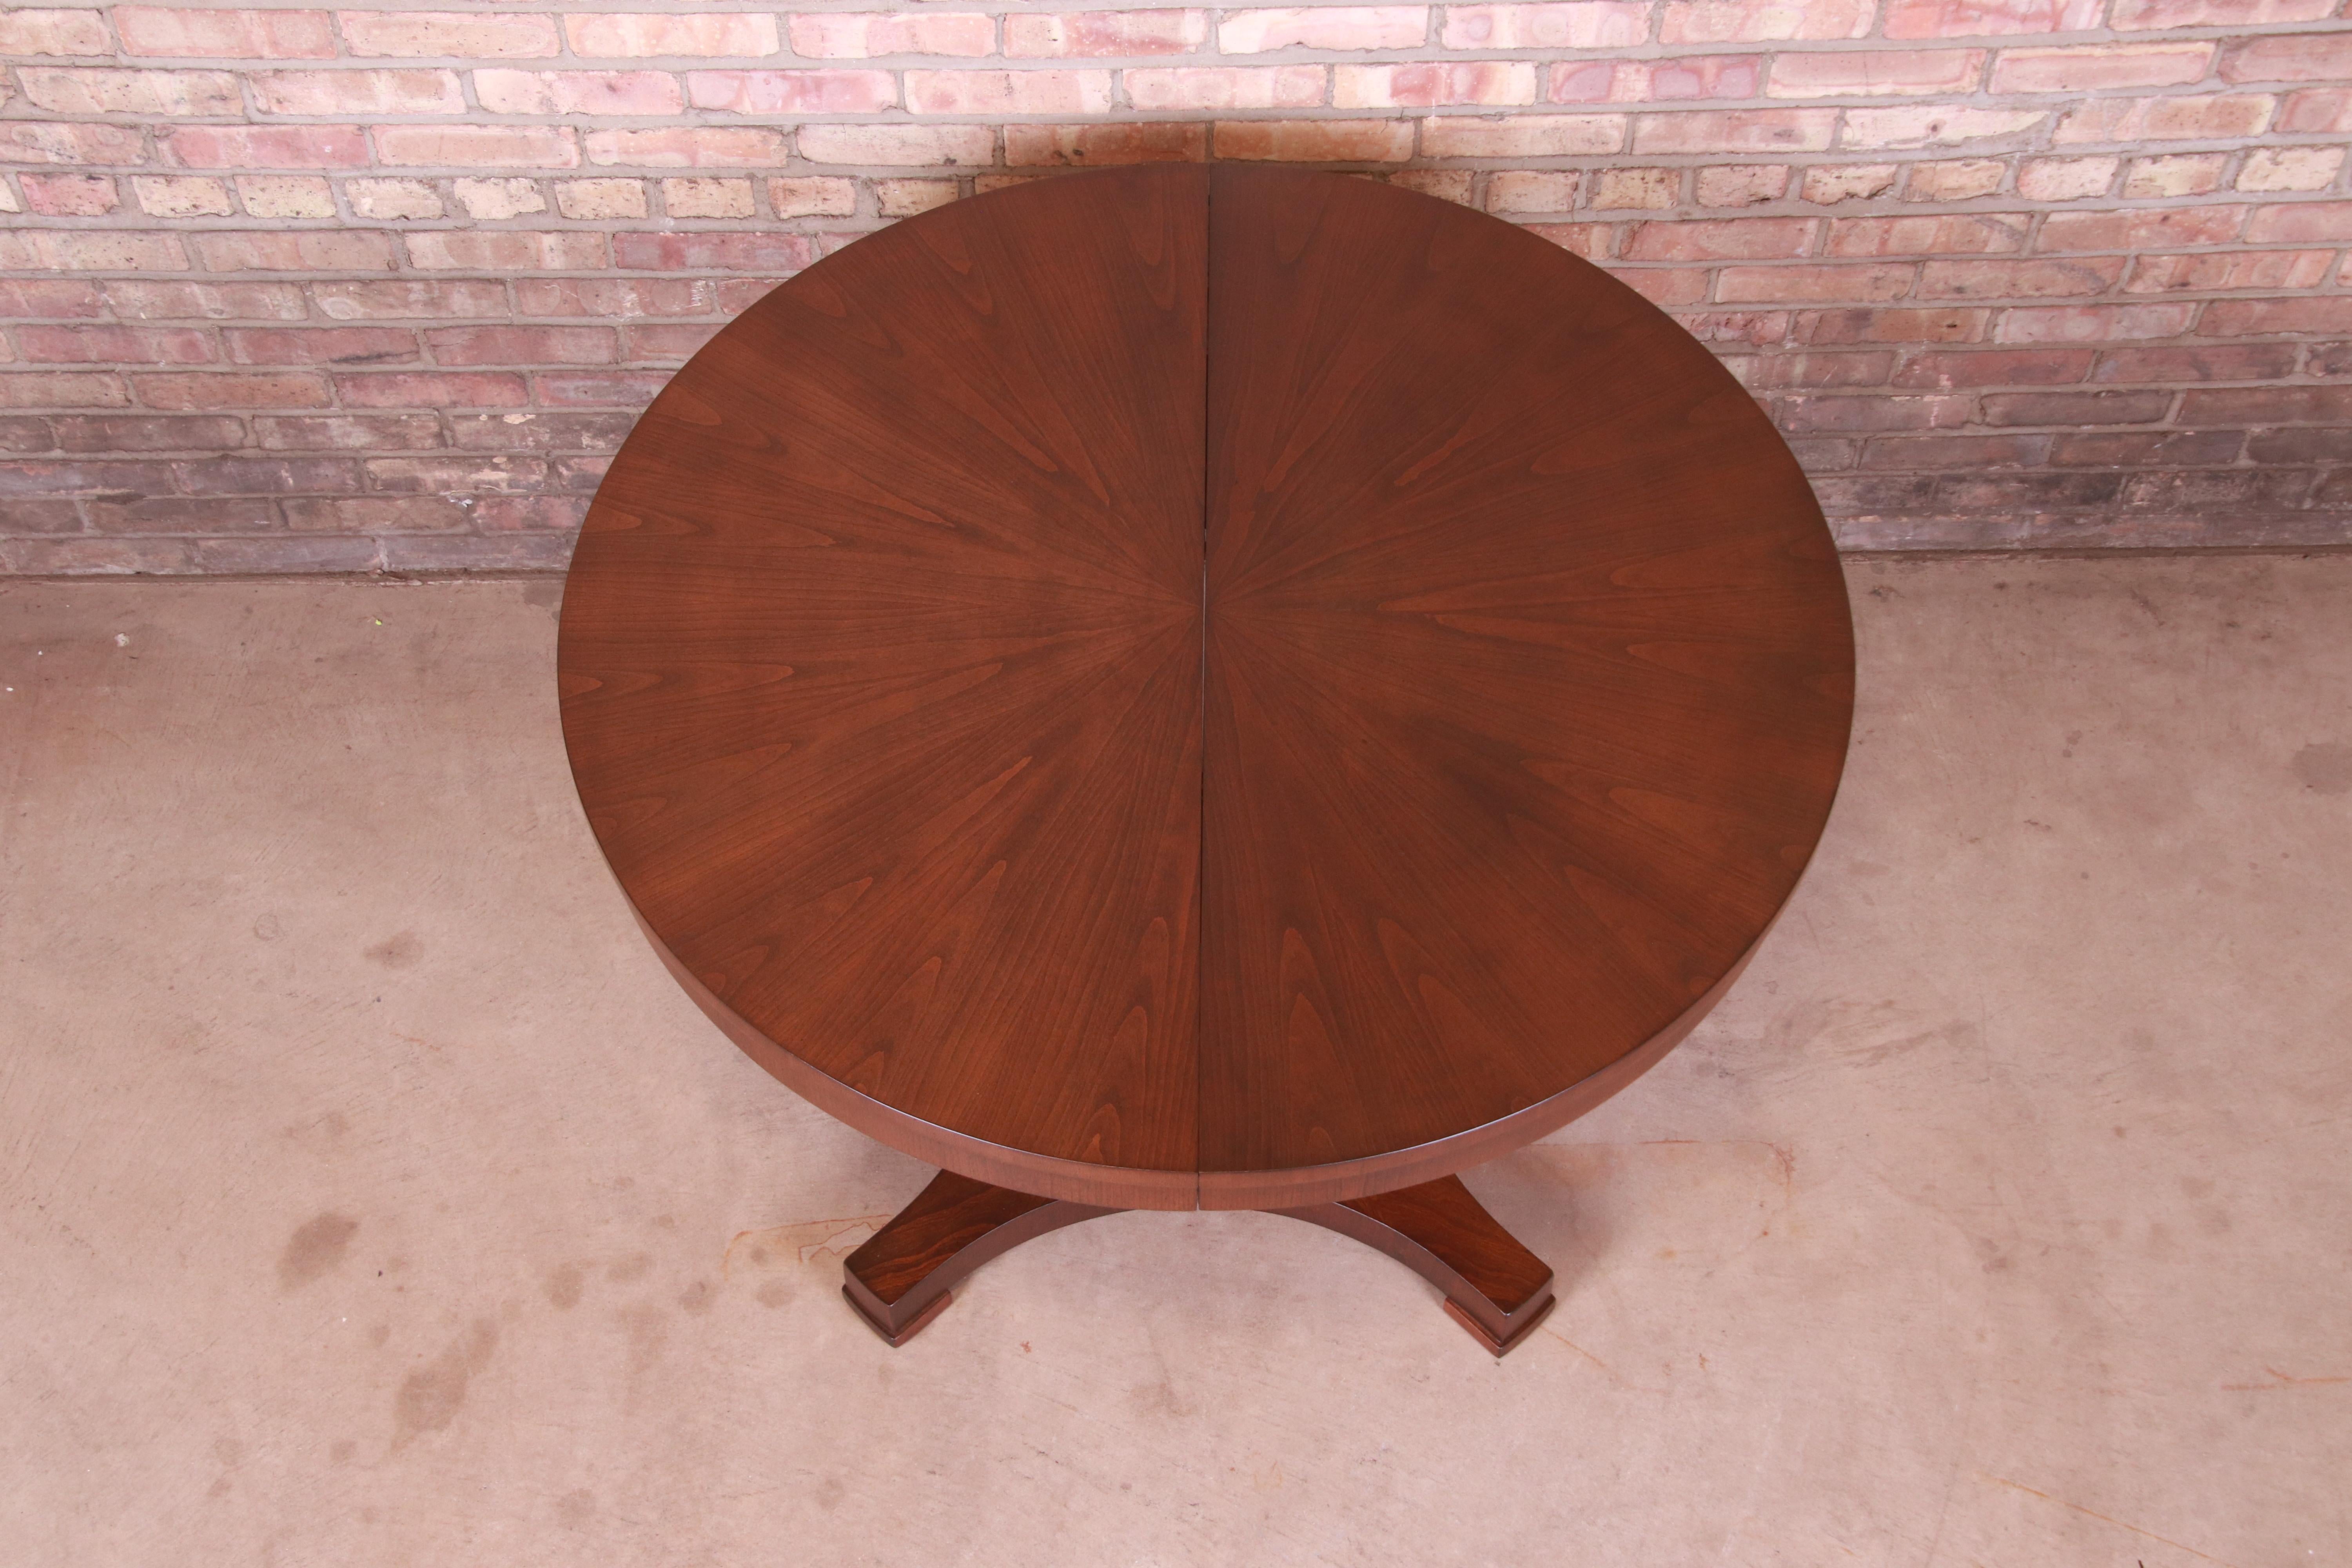 Baker Furniture Regency Cherry Wood Pedestal Dining Table, Newly Refinished 11